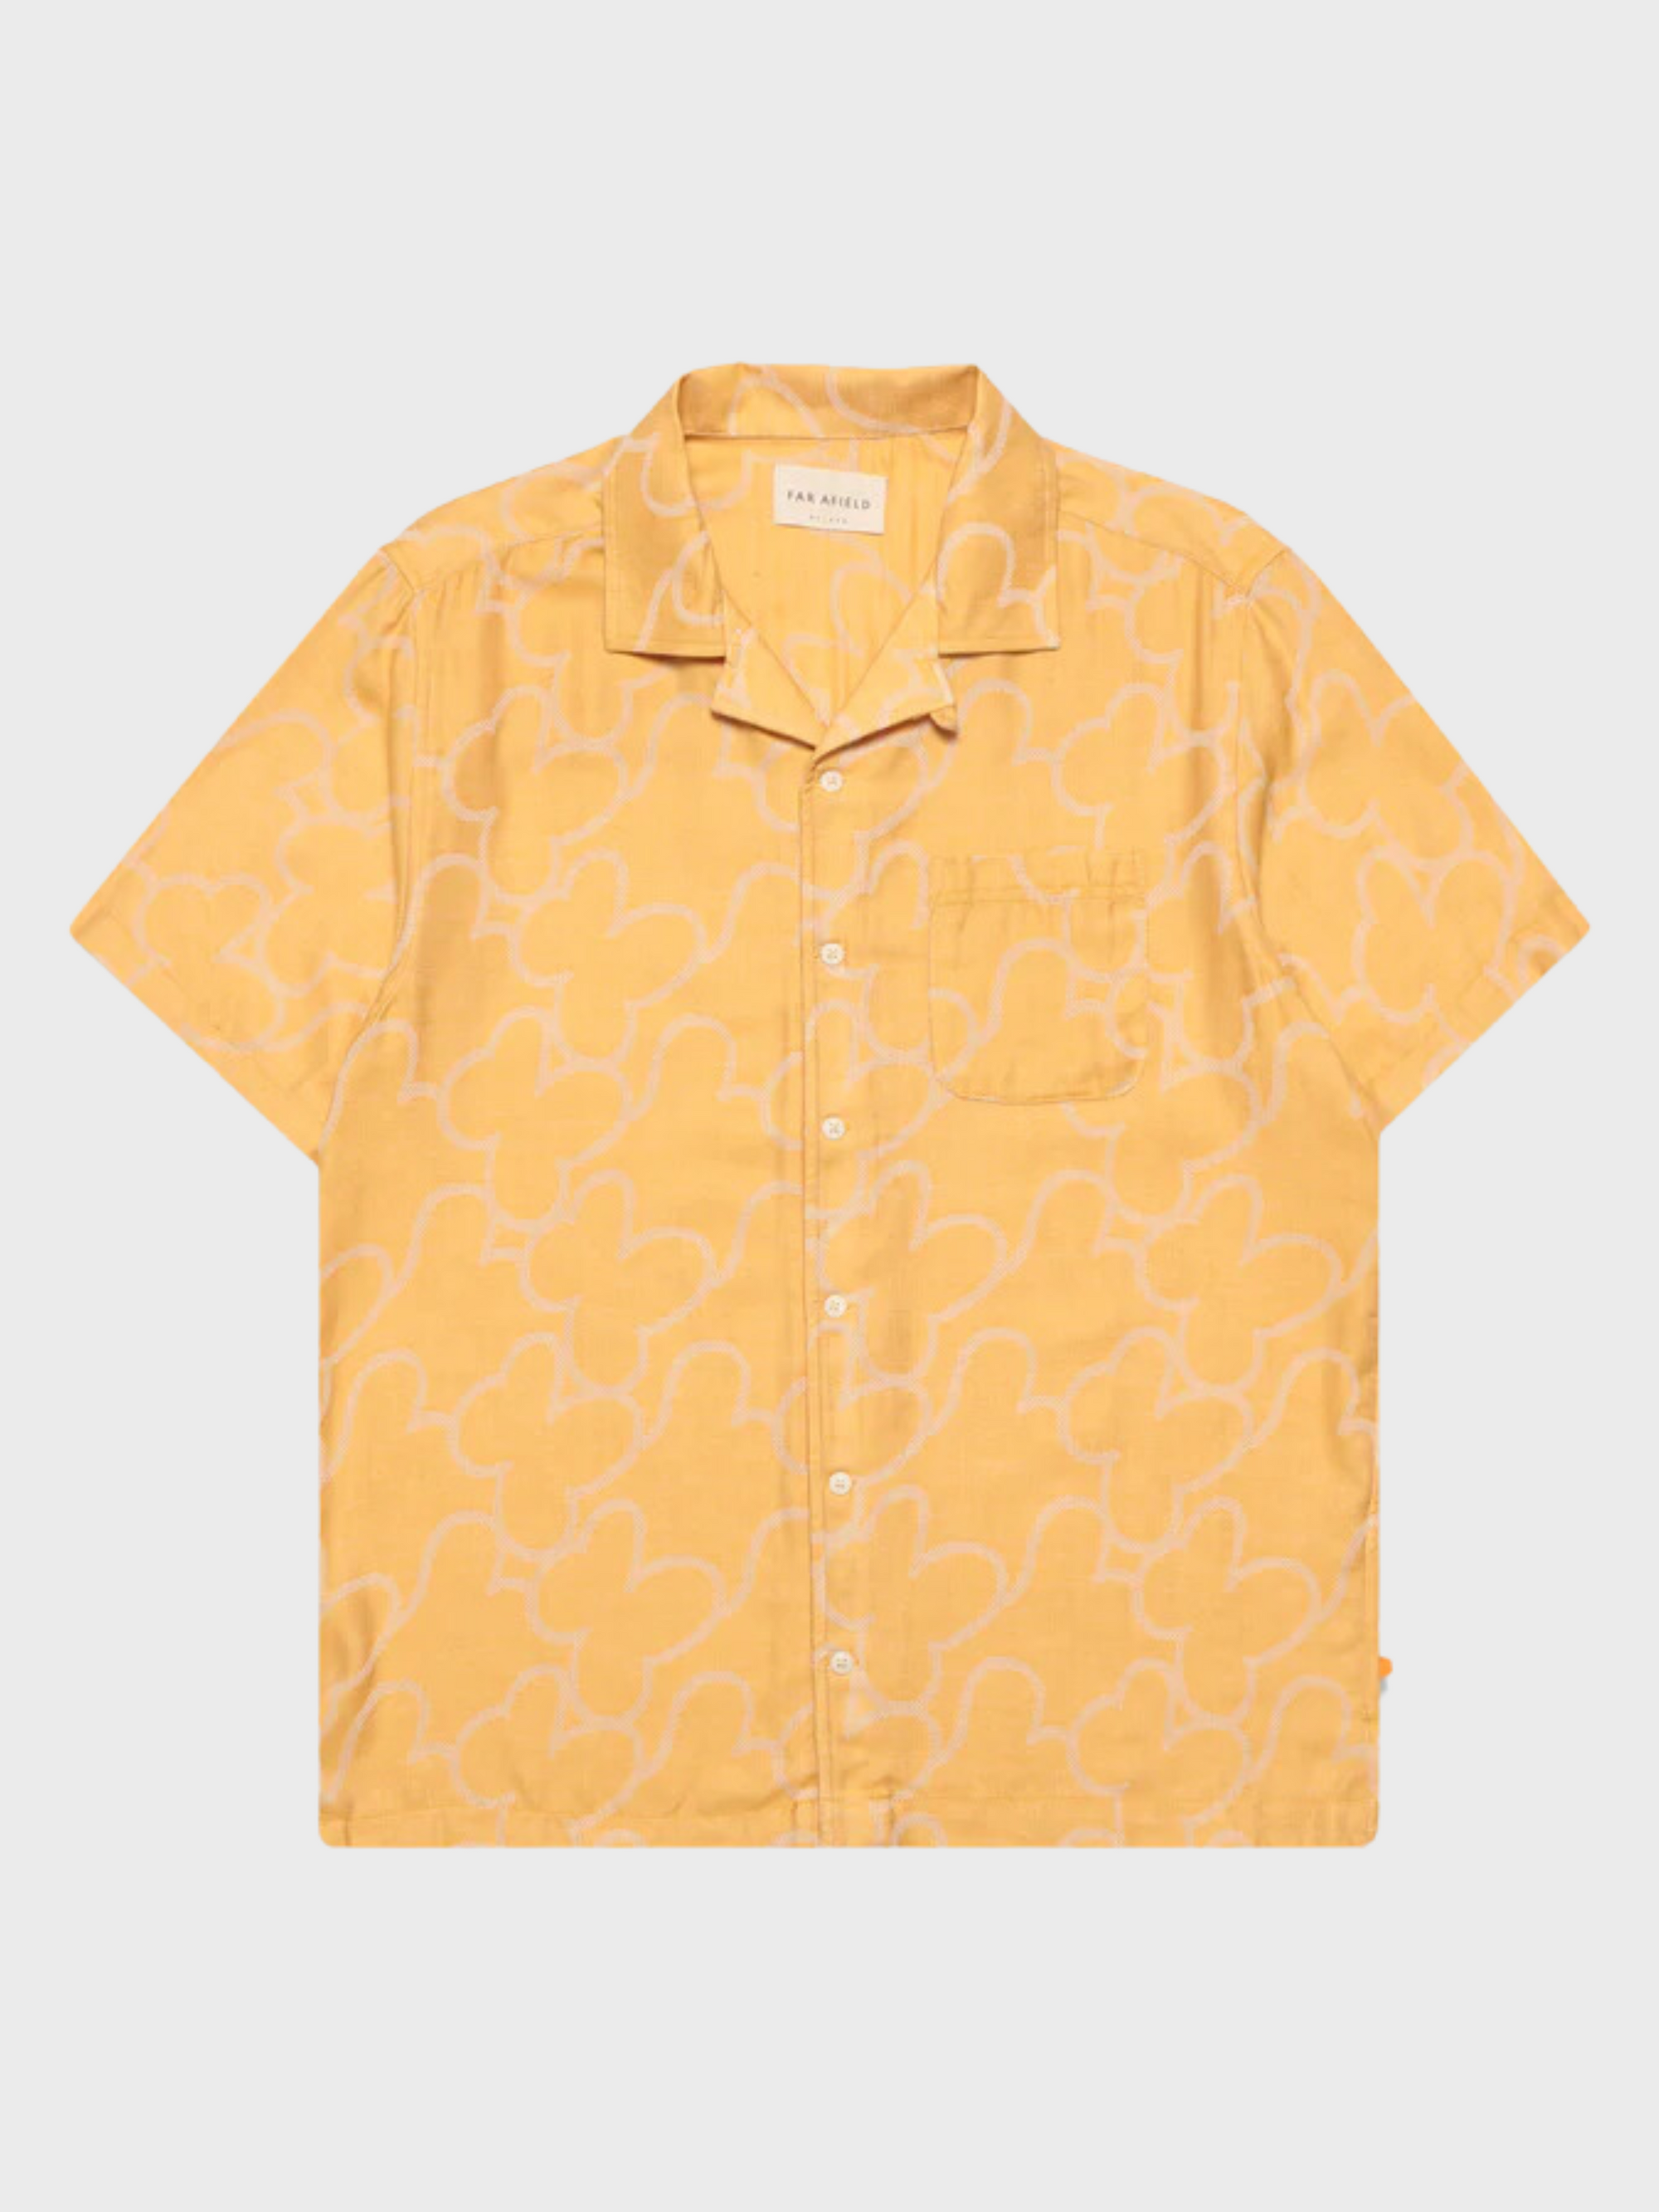 Far Afield Stachio SS Floral Jacquard Button Up Honey Gold SS24-Men's Shirts-Brooklyn-Vancouver-Yaletown-Canada